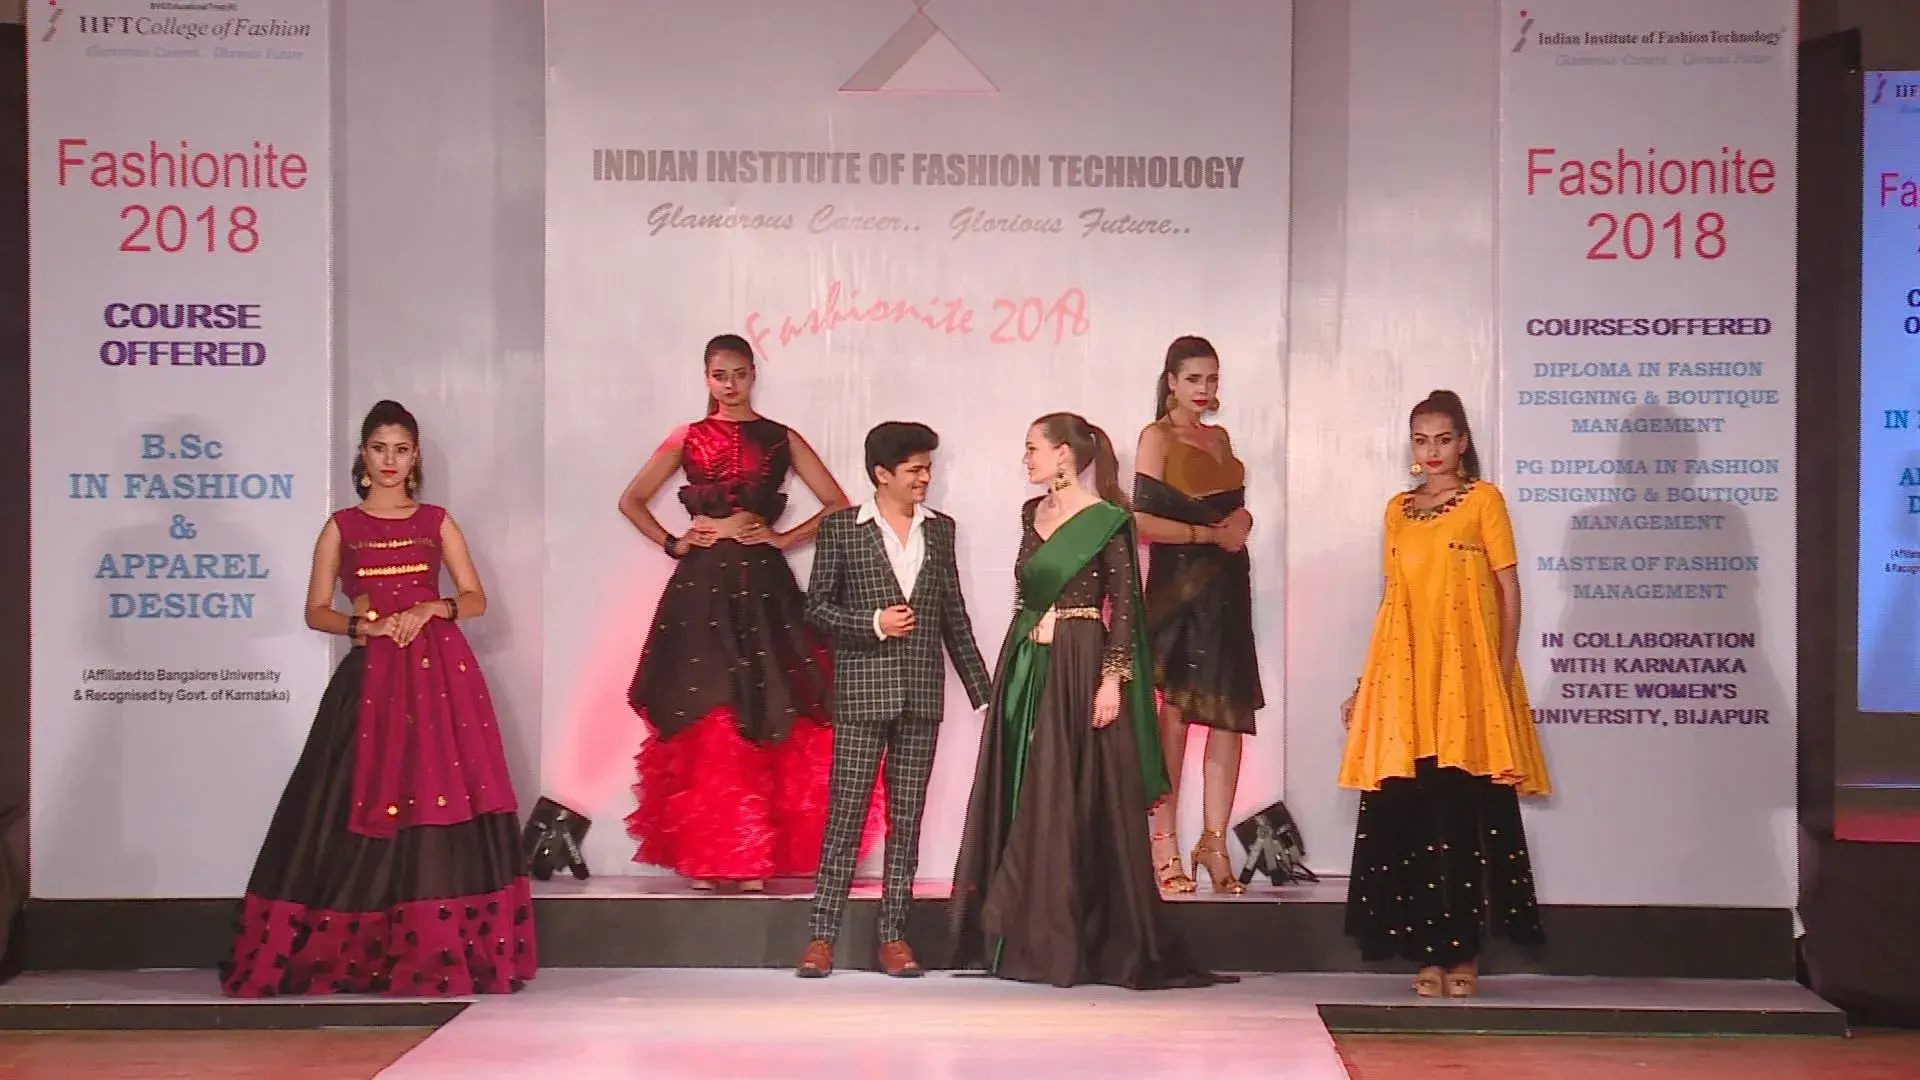 Image from Fashionite 2018 1